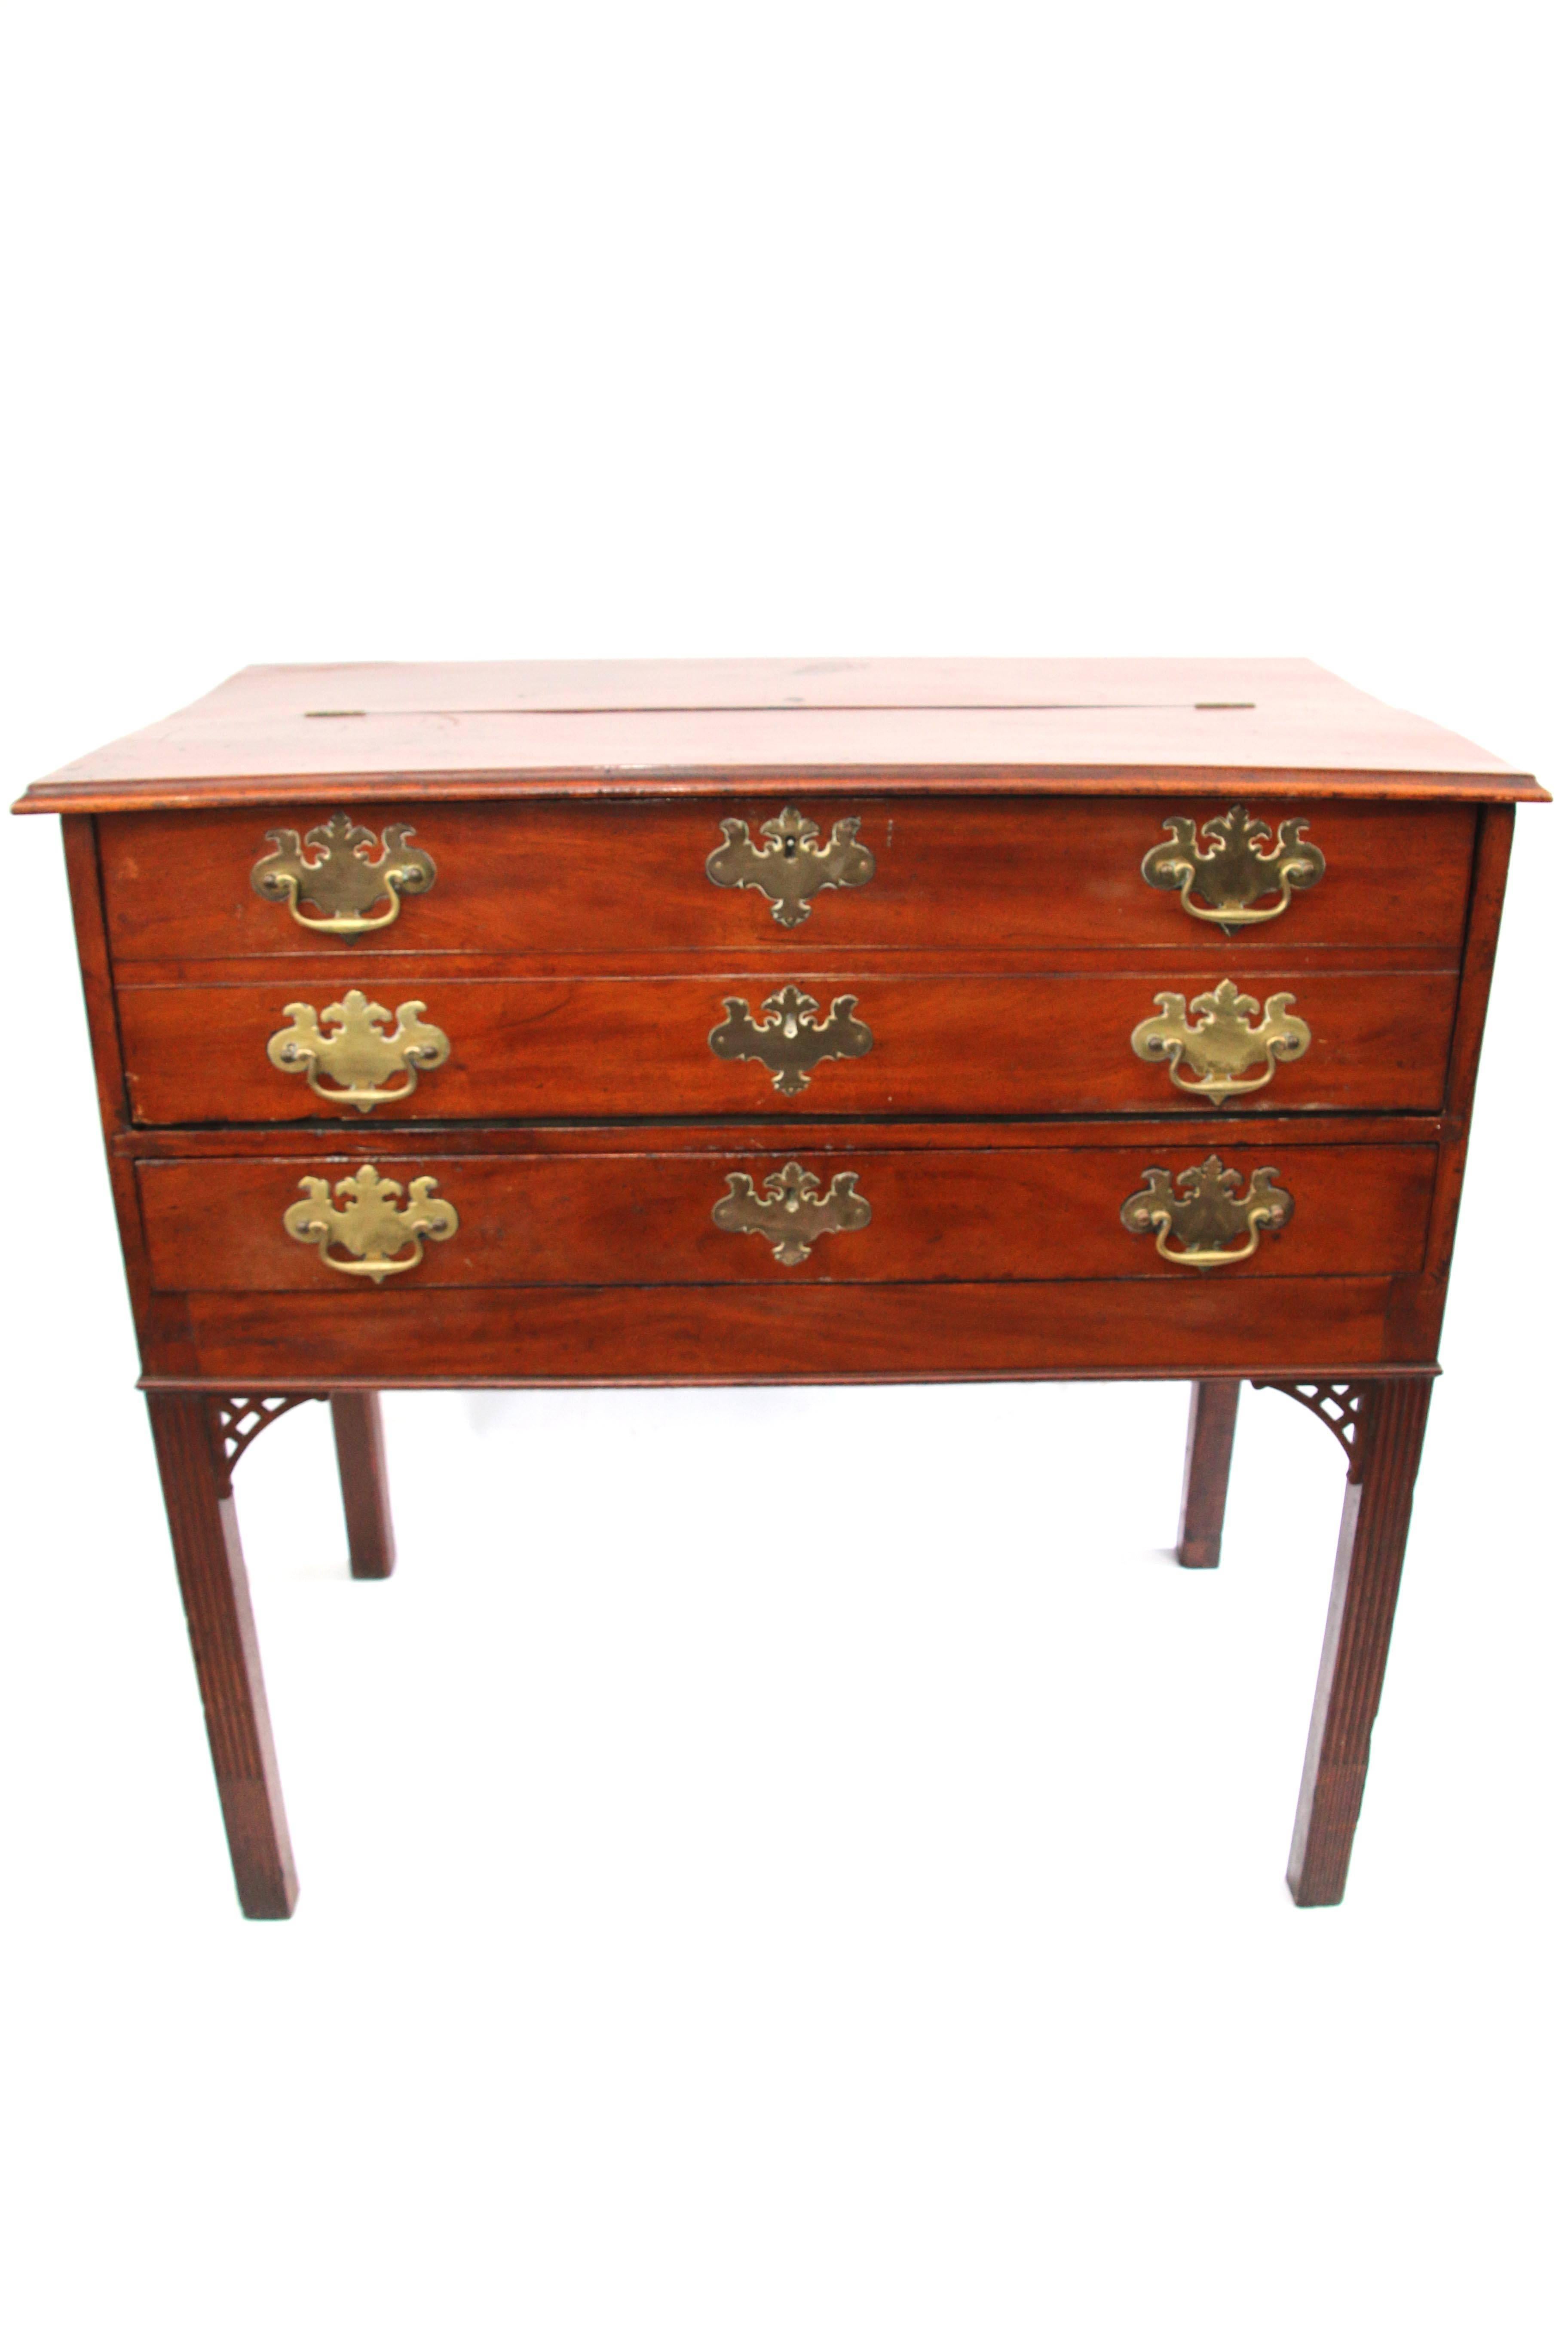 Rare form Rhode Island mahogany Chippendale merchant's desk, having a split hinged molded top possessing a mirror, faux two-drawer front hinging down to reveal a writing surface with beautifully fitted interior, a single working partitioned drawer